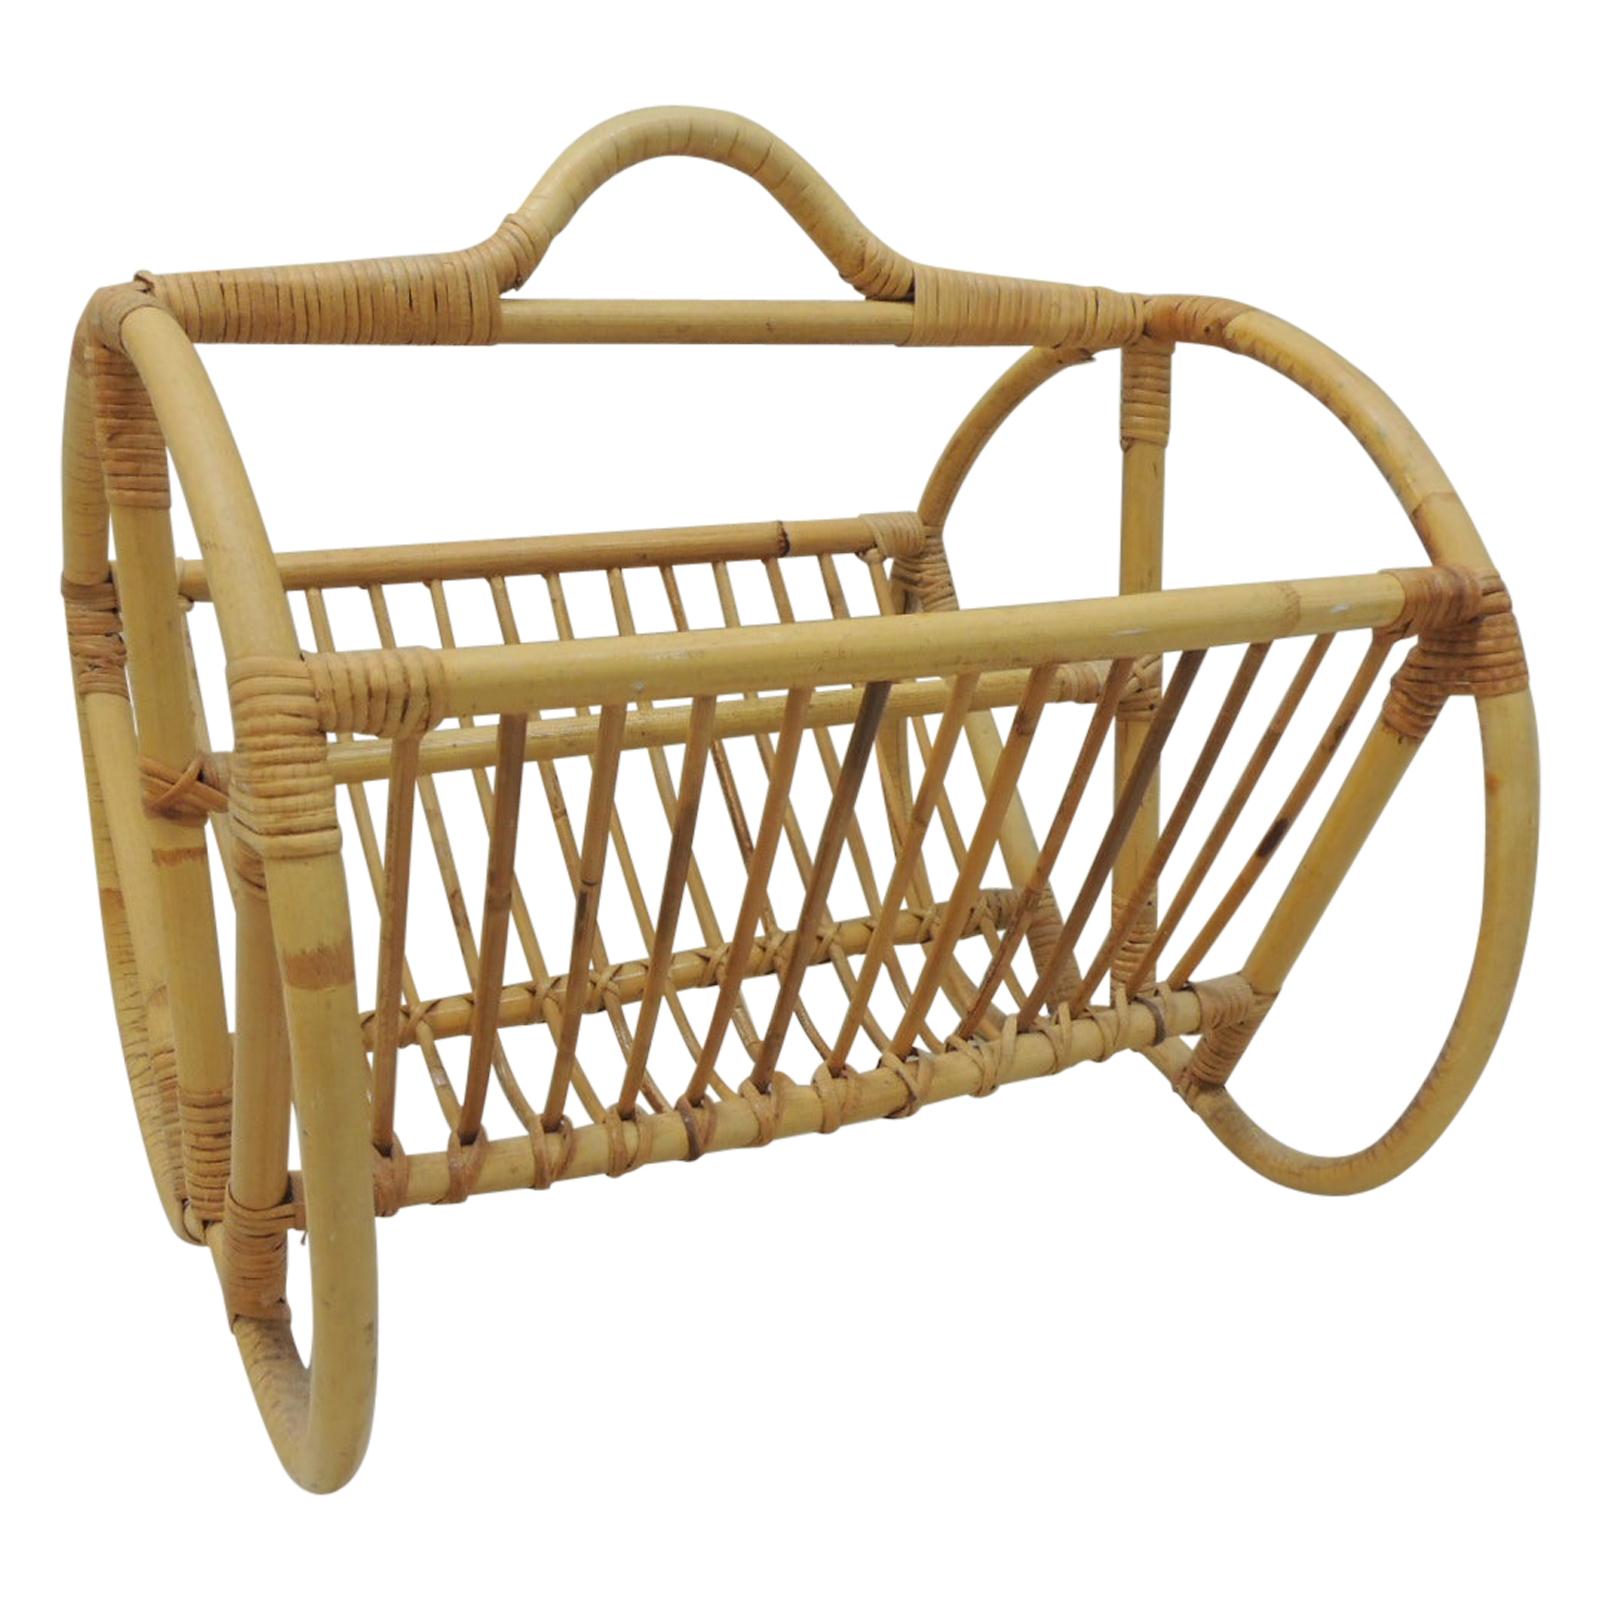 Vintage Bamboo and Rattan Magazine Holder or Rack